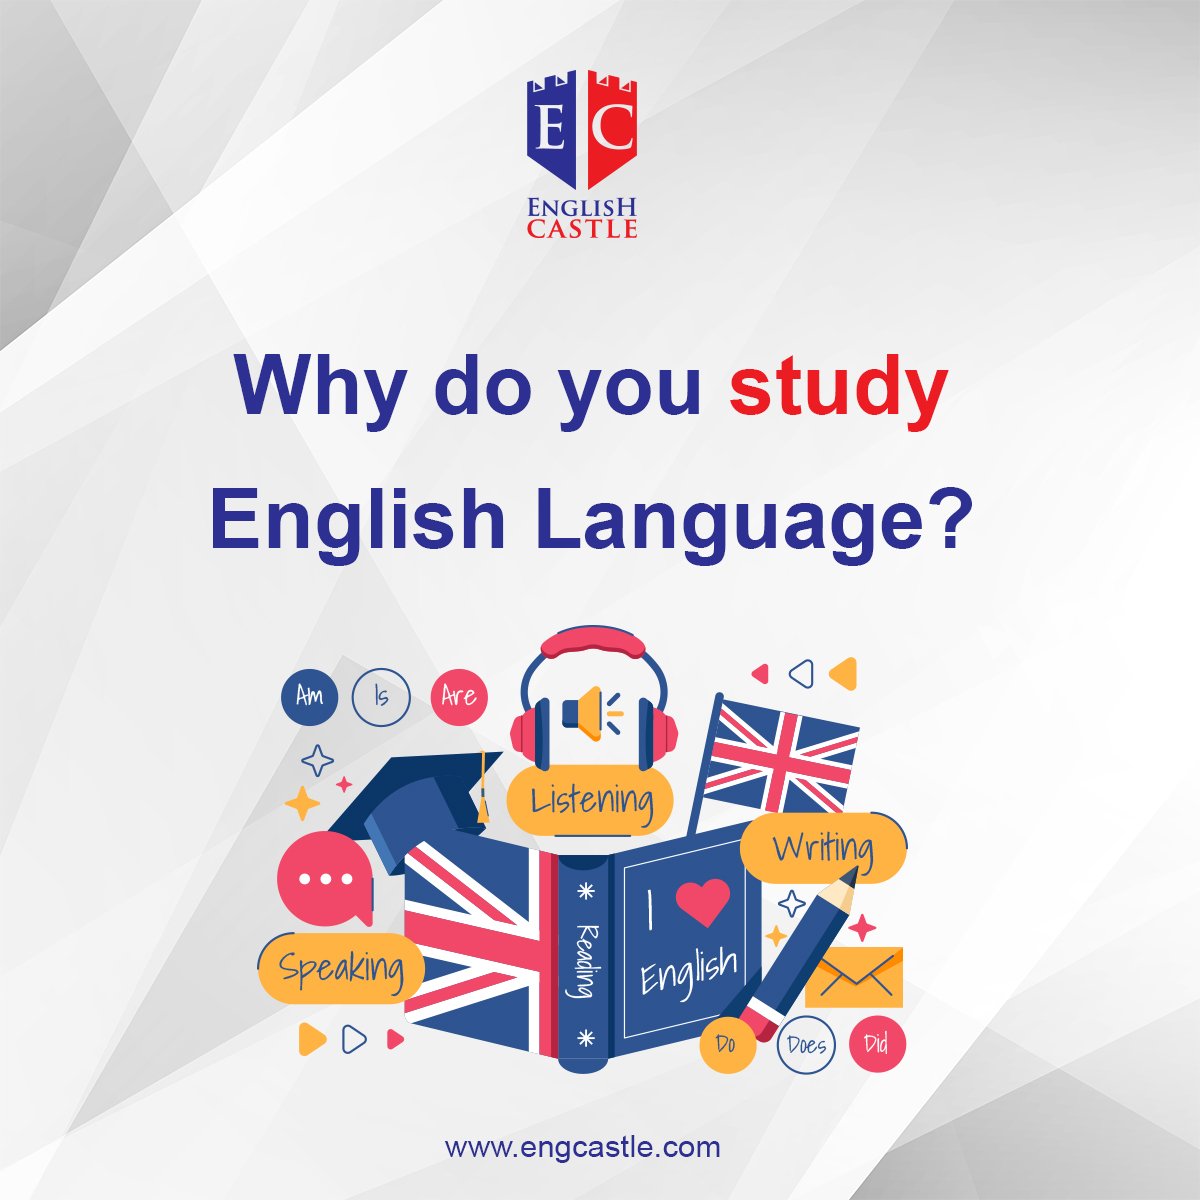 Why?🤔

Share us your answers in the comments 😍❤

#English
#Anytime 
#Anywhere
#OnlineCourses
#ForeignLanguage
#EnglishLanguage 
#EnglishPotential 
#LearnEnglish 
#EnglishCastle